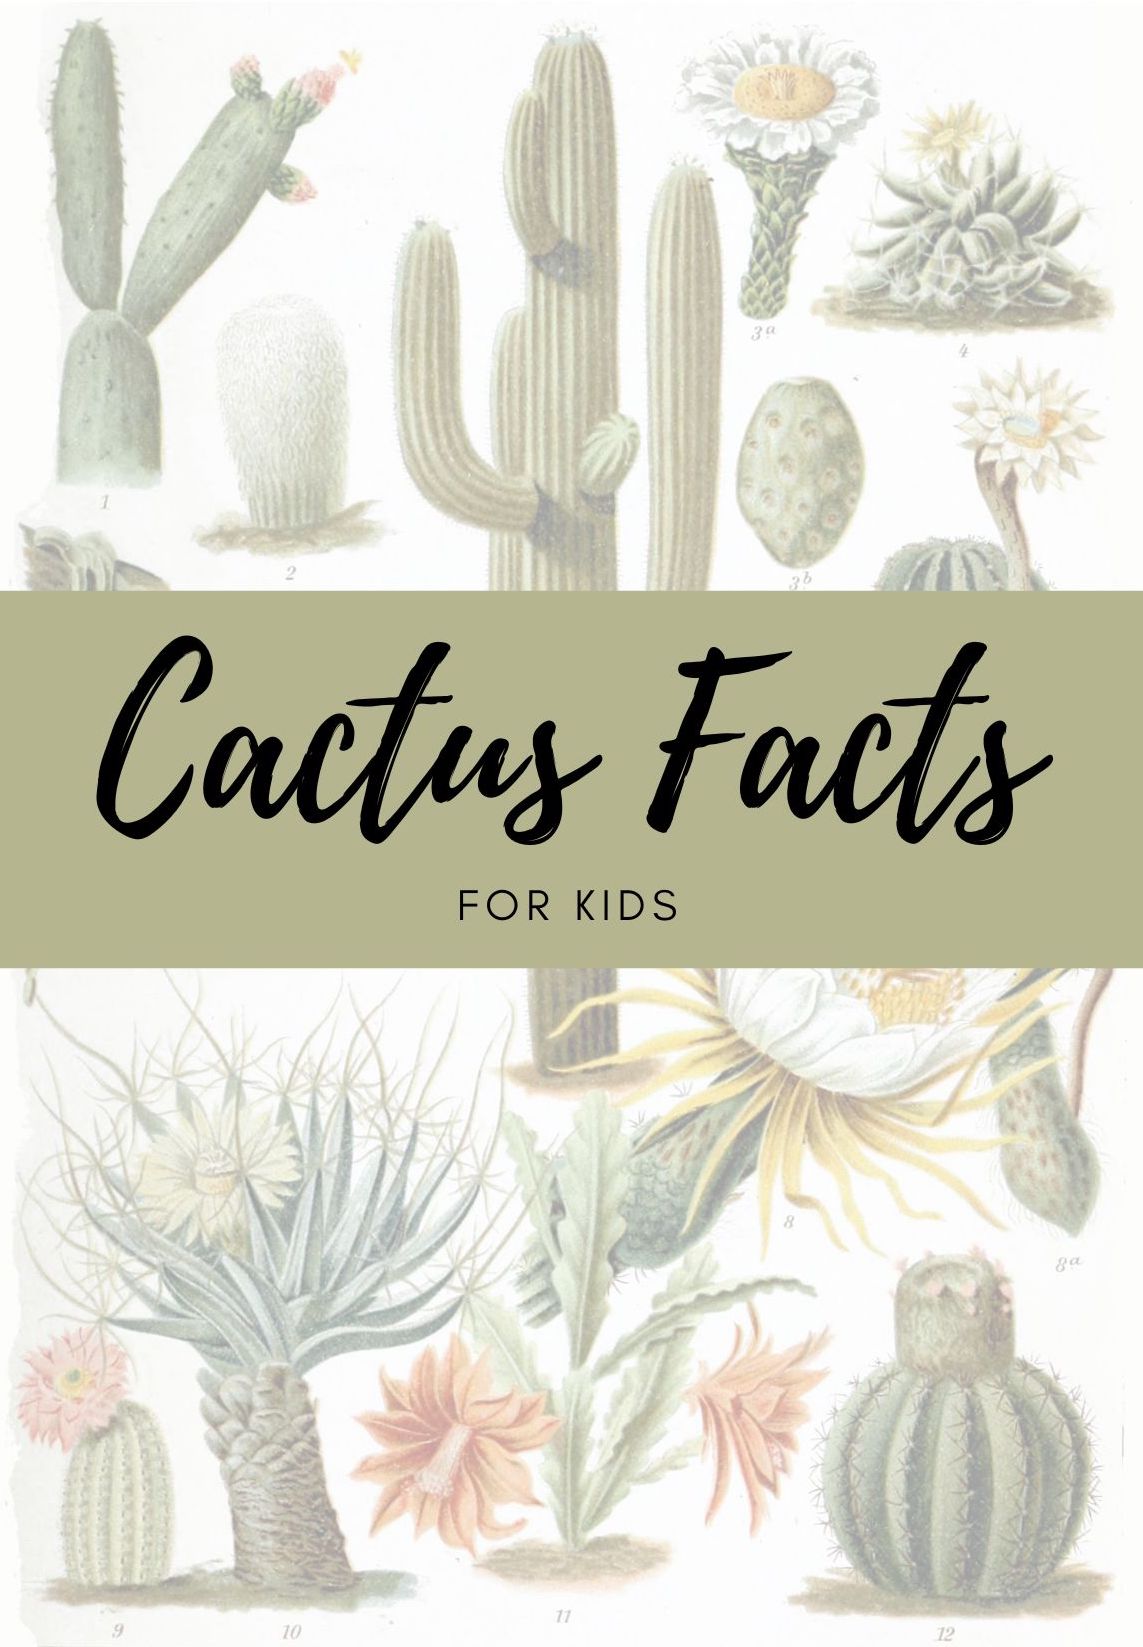 Cactus facts for kids